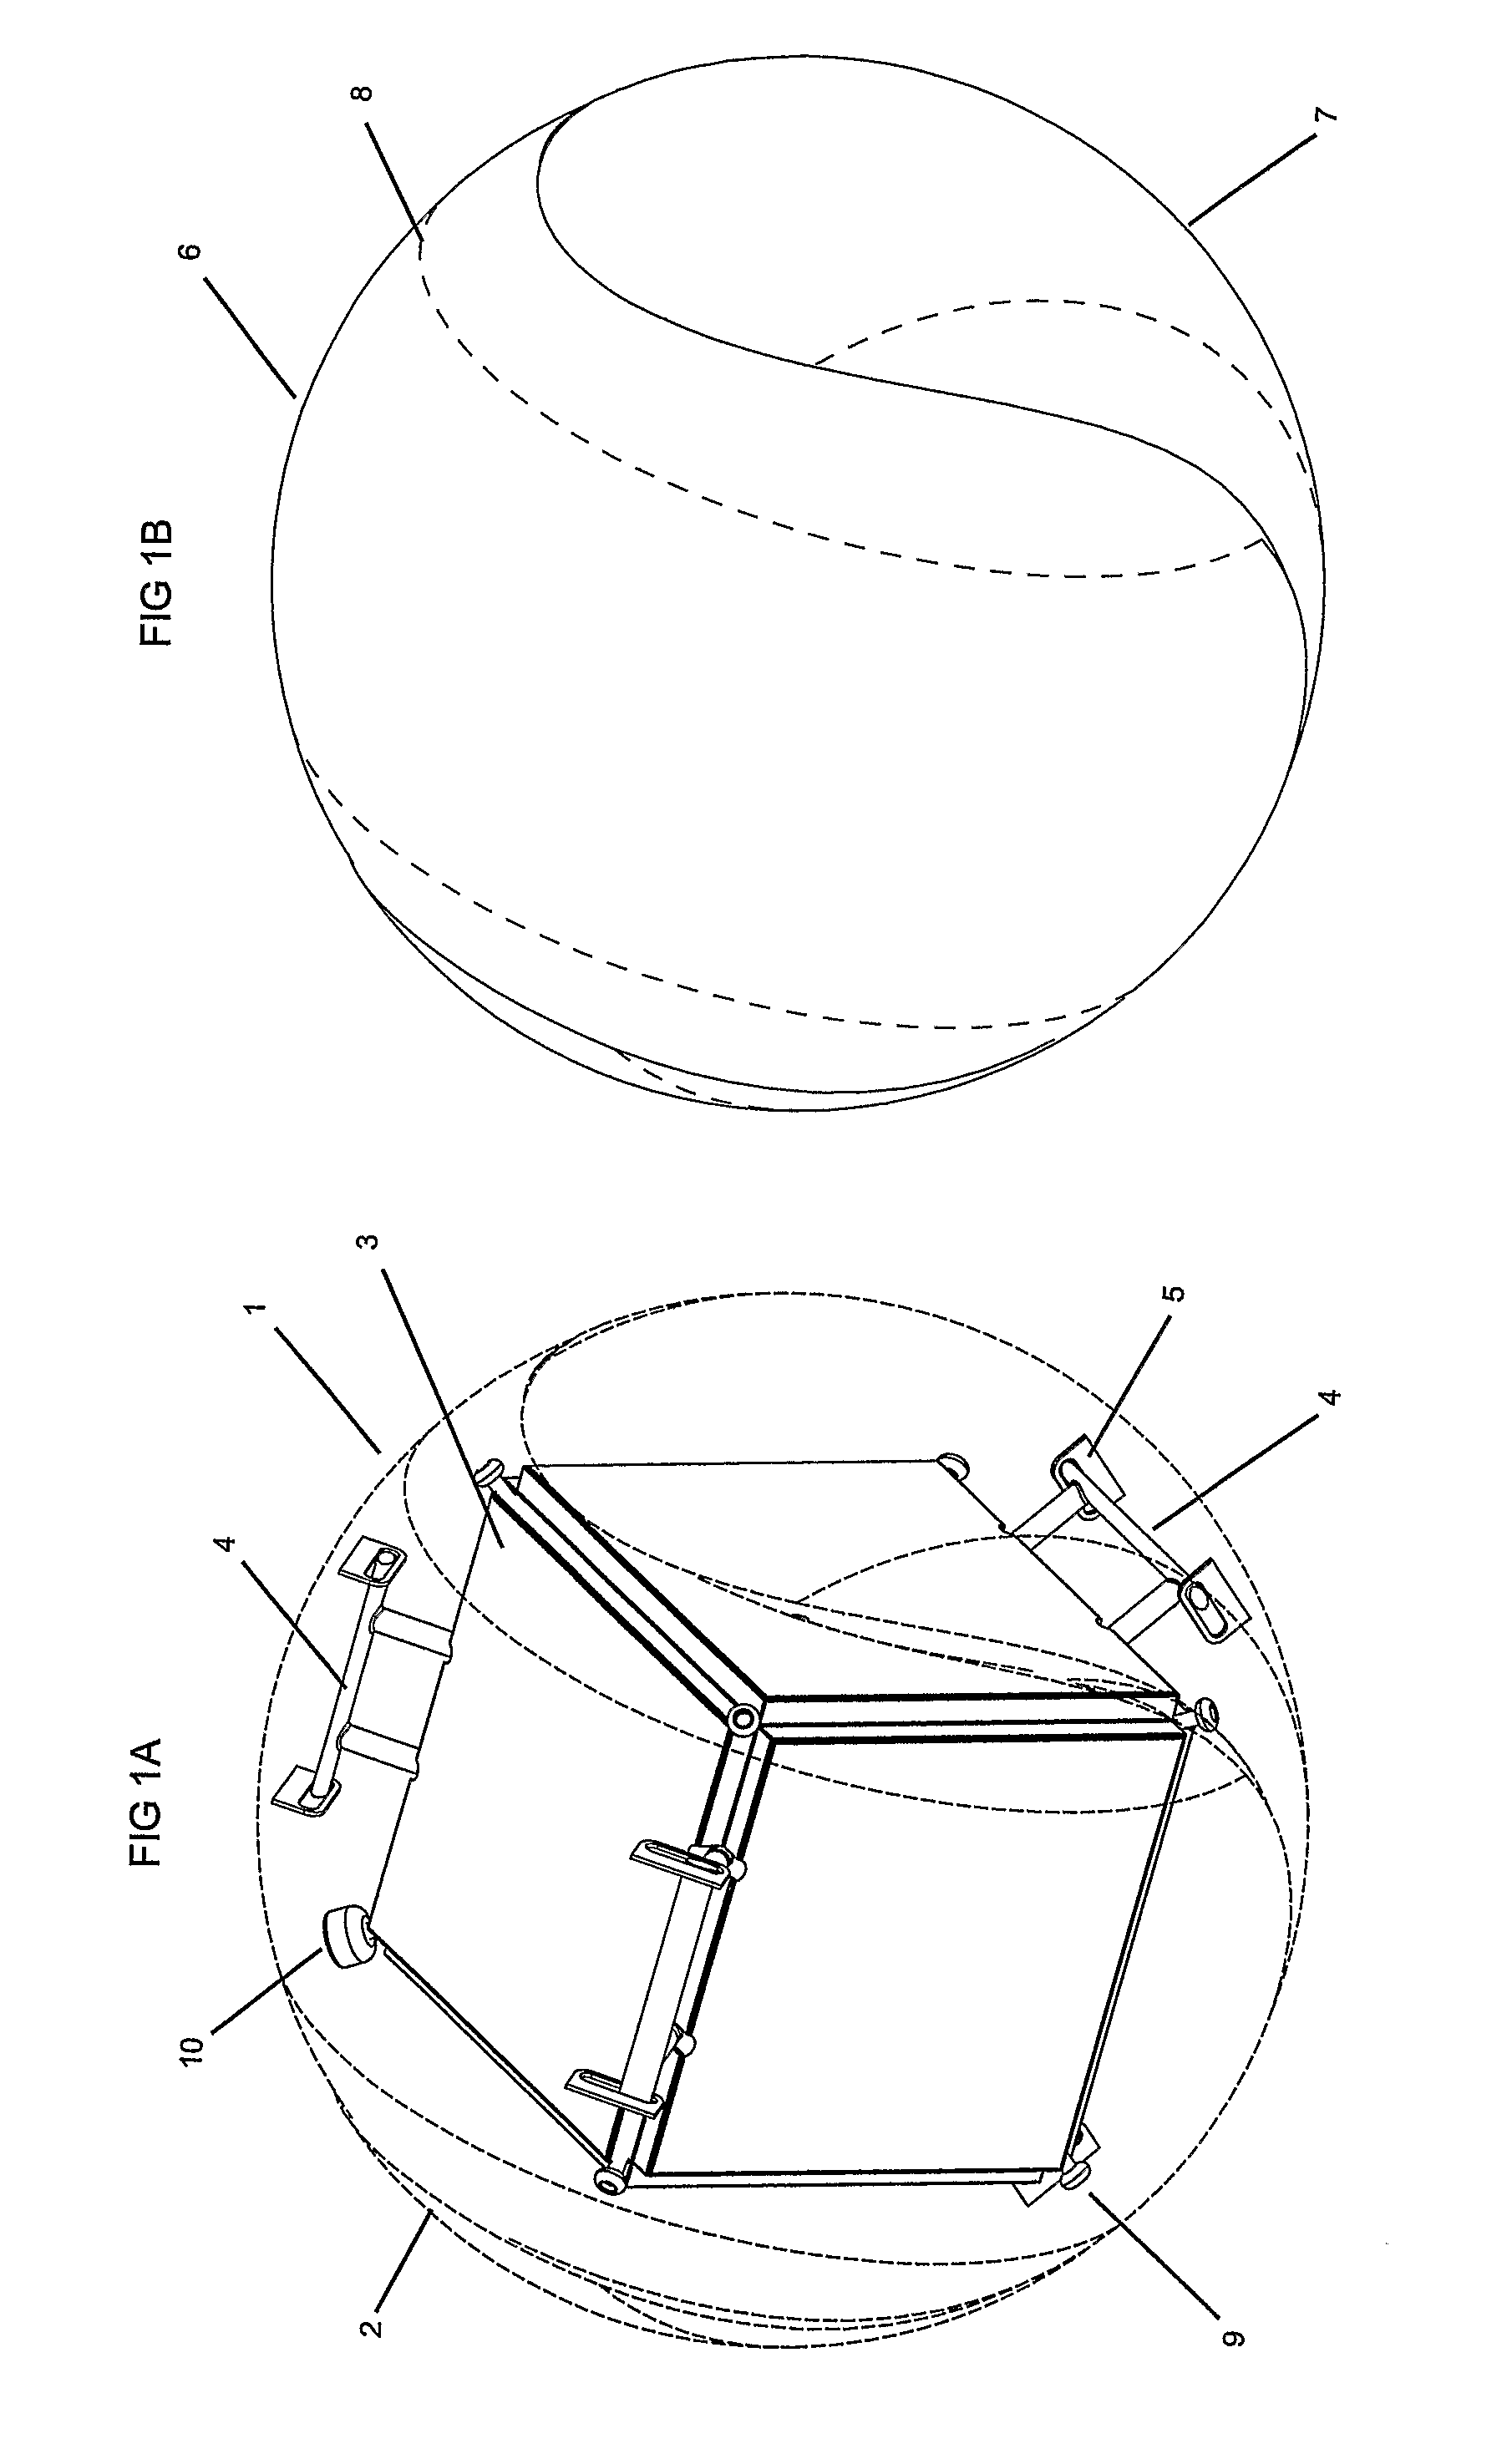 Spherical Display and Control Device